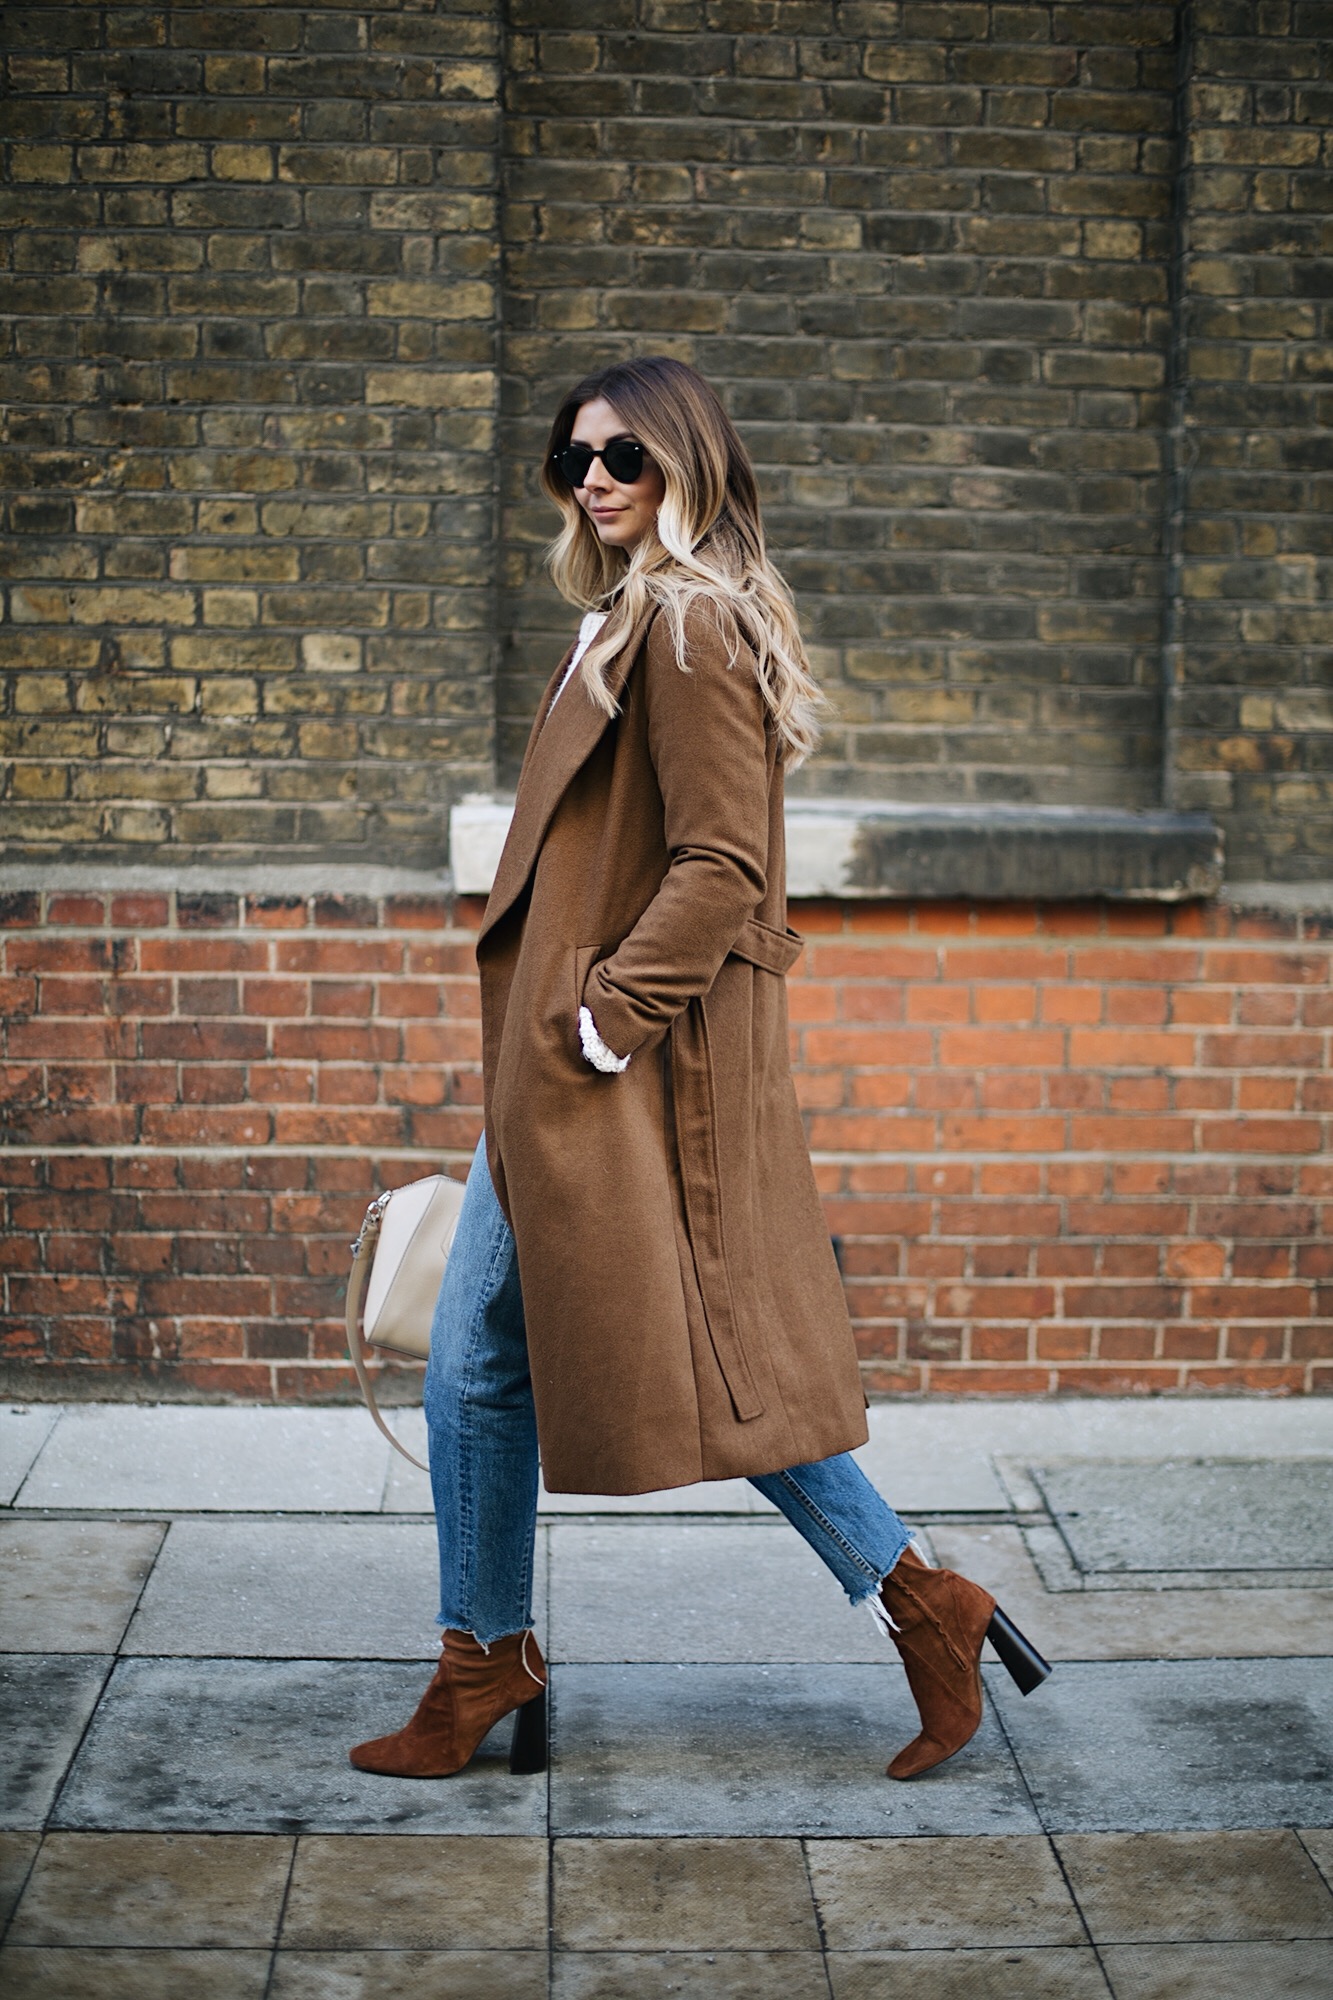 Emma Hill wears Tan coat, cream sweater, frayed hem jeans, givenchy antigona small ivory, tan suede boots, winter outfit